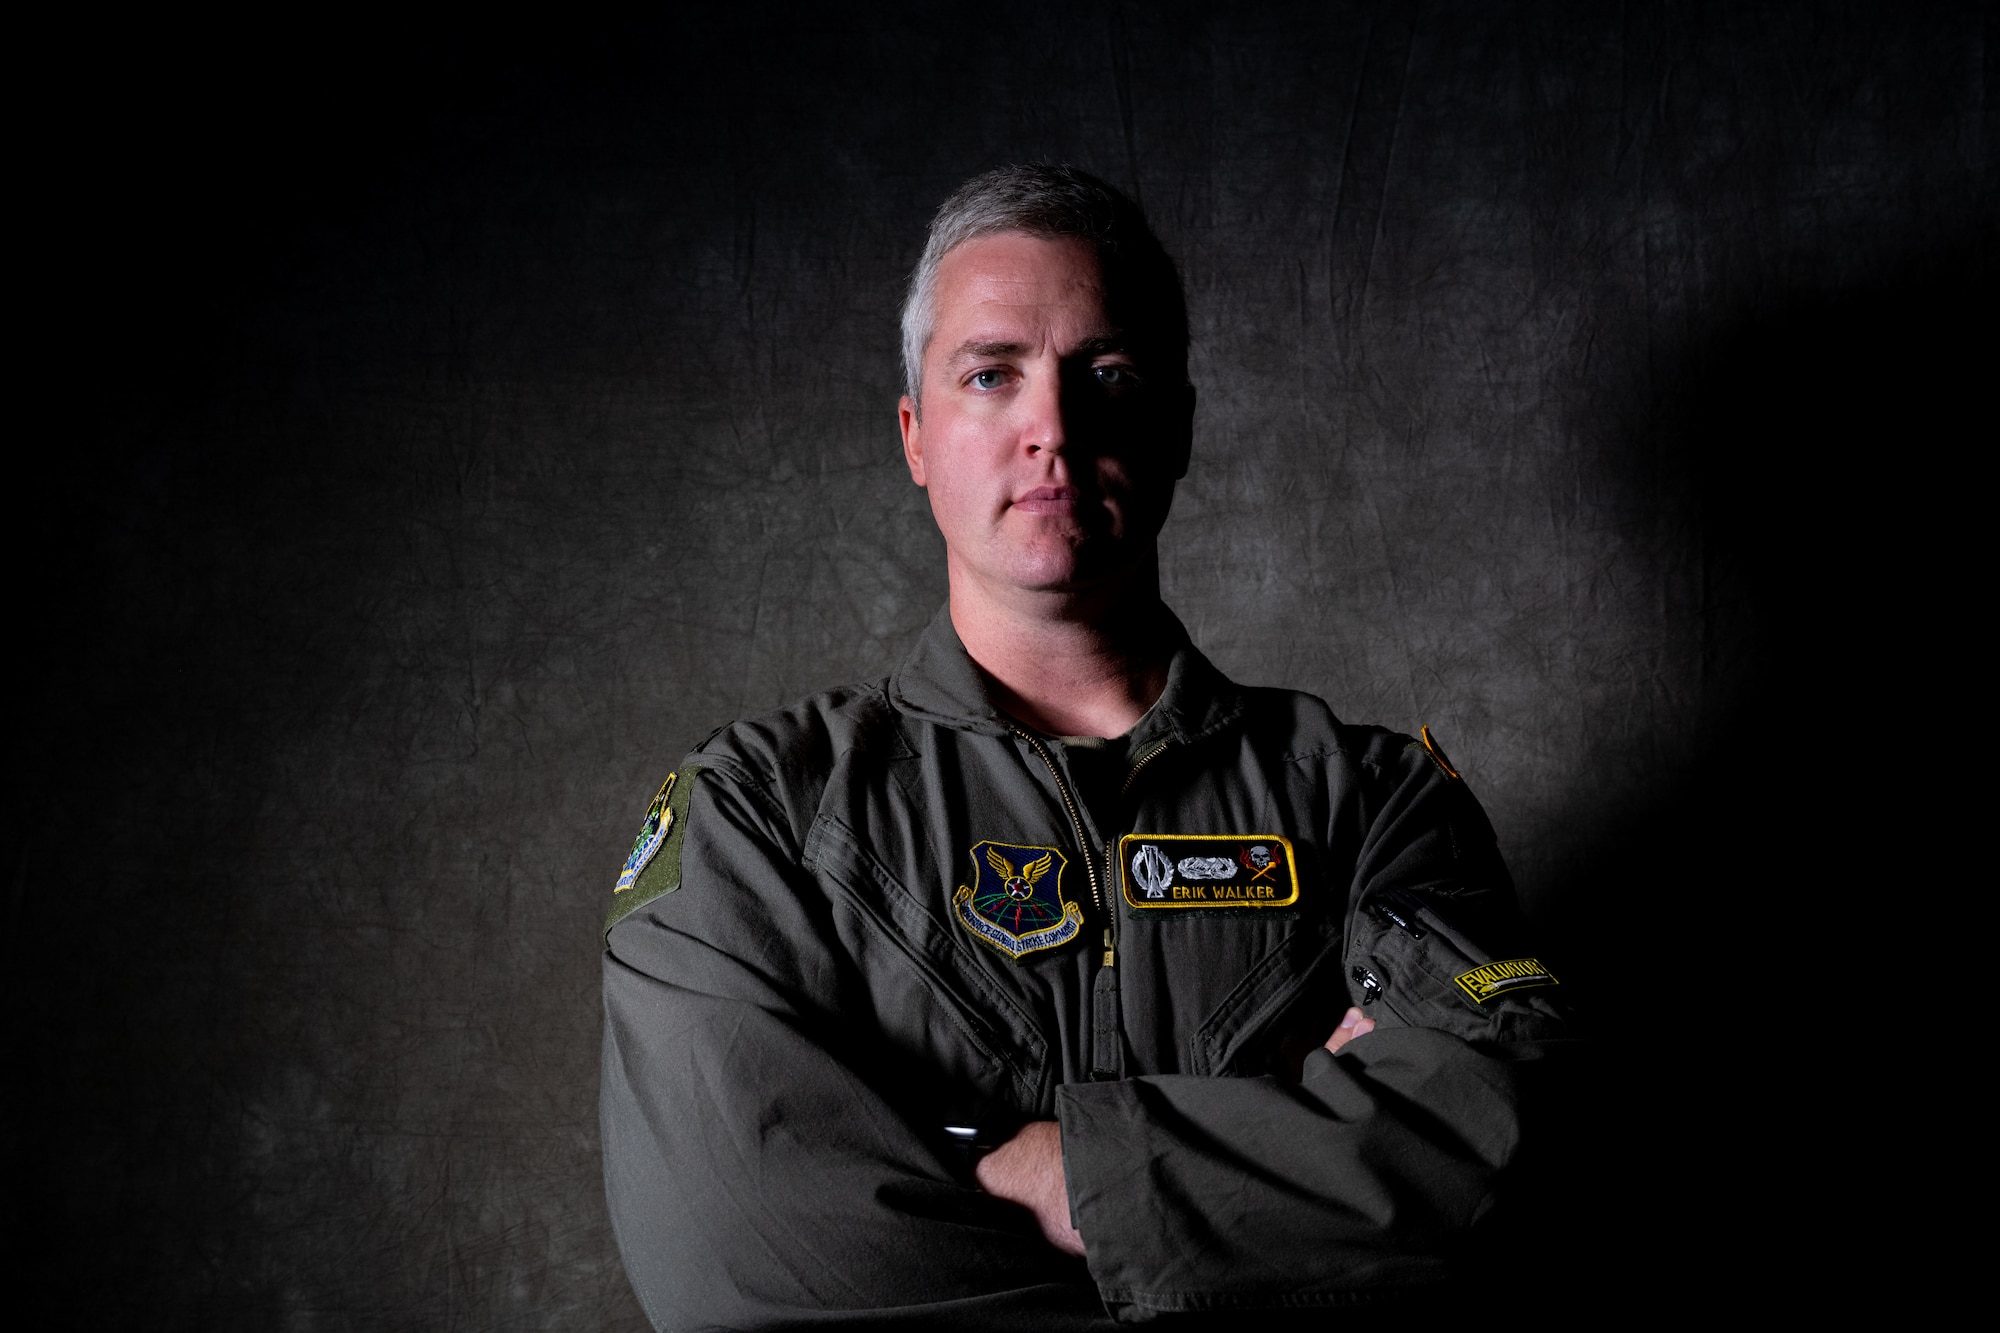 U.S. Air Force Capt. Erik Walker, 742nd Missile Squadron instructor poses for a photo Sept. 09, 2023 at Minot, North Dakota. Walker helped an injured woman who was involved in a motorcycle accident on Aug. 28, 2023. (U.S. Air Force photo by Airman 1st Class Trust Tate)